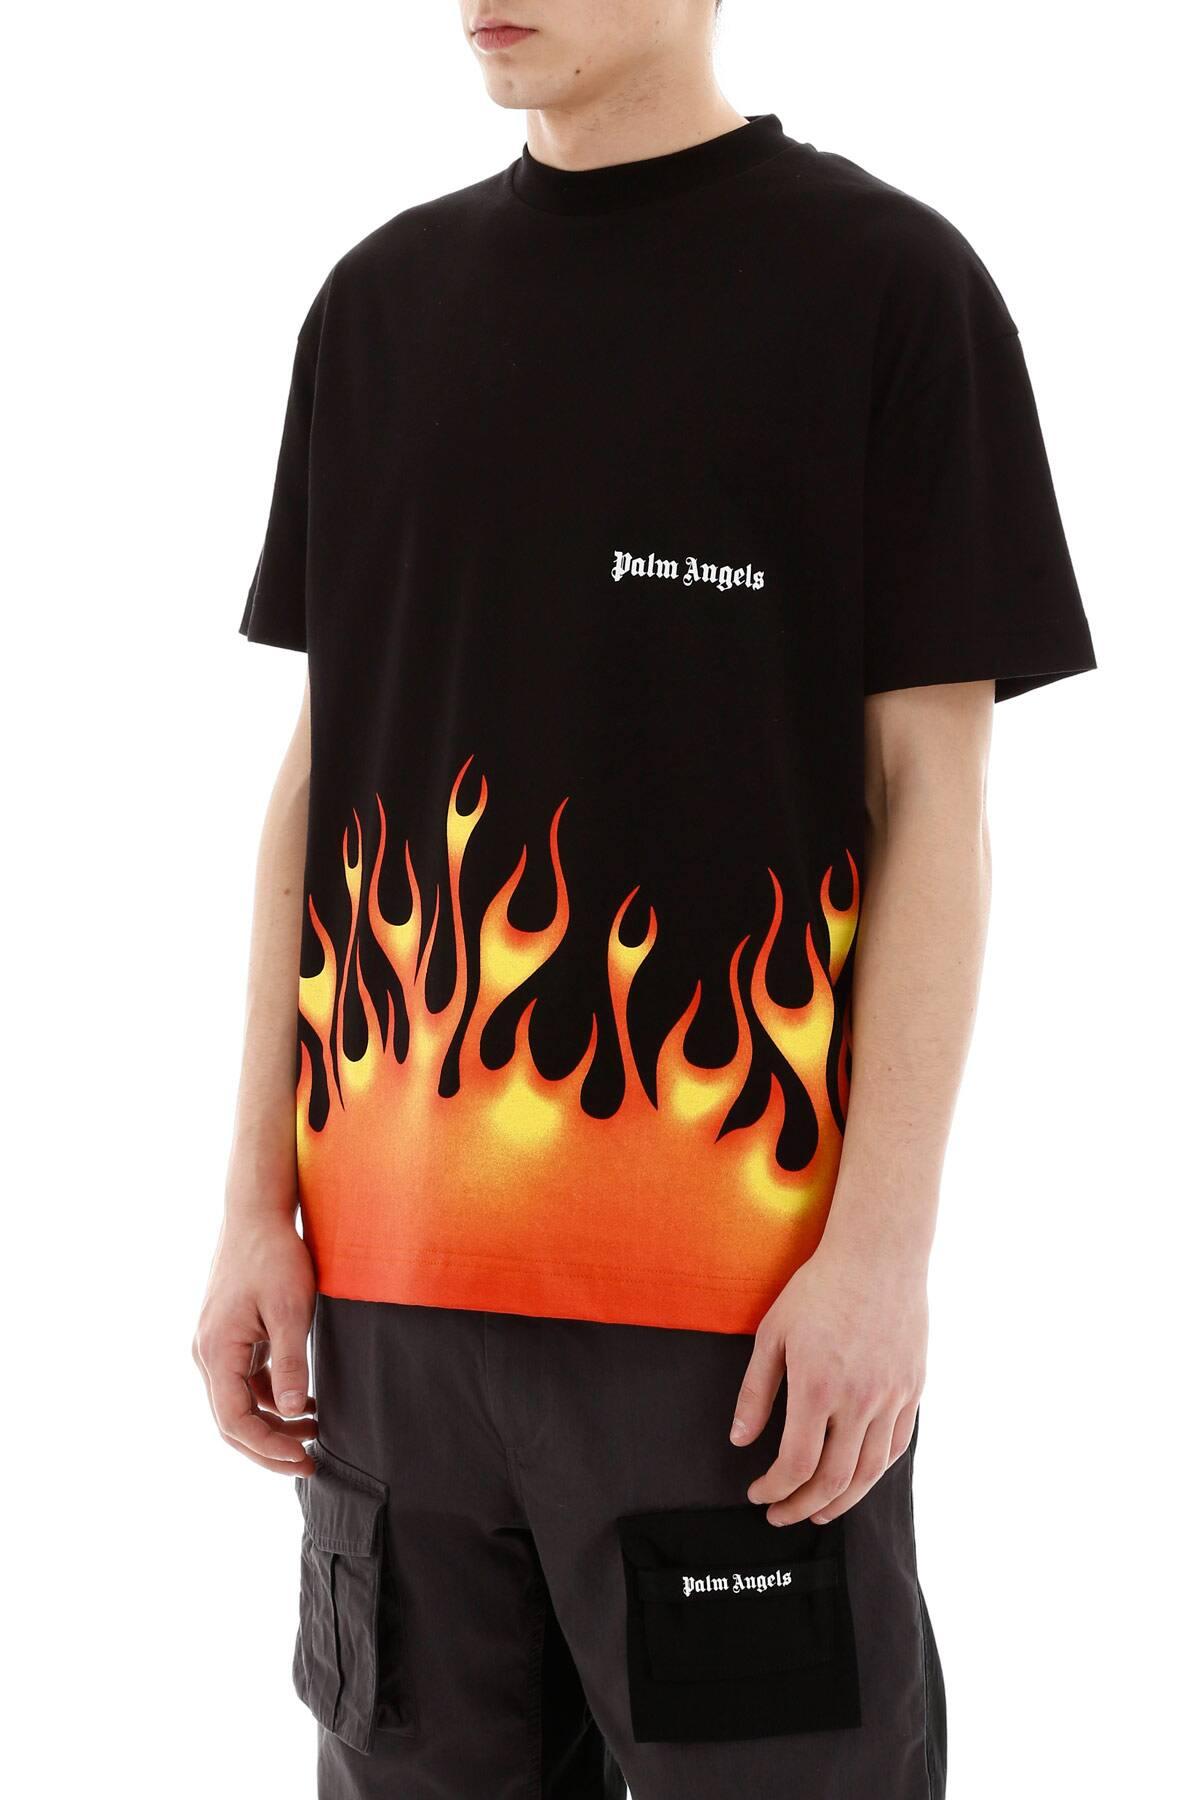 Palm Angels Firestarter Classic Tee in Black for Men - Save 36% - Lyst